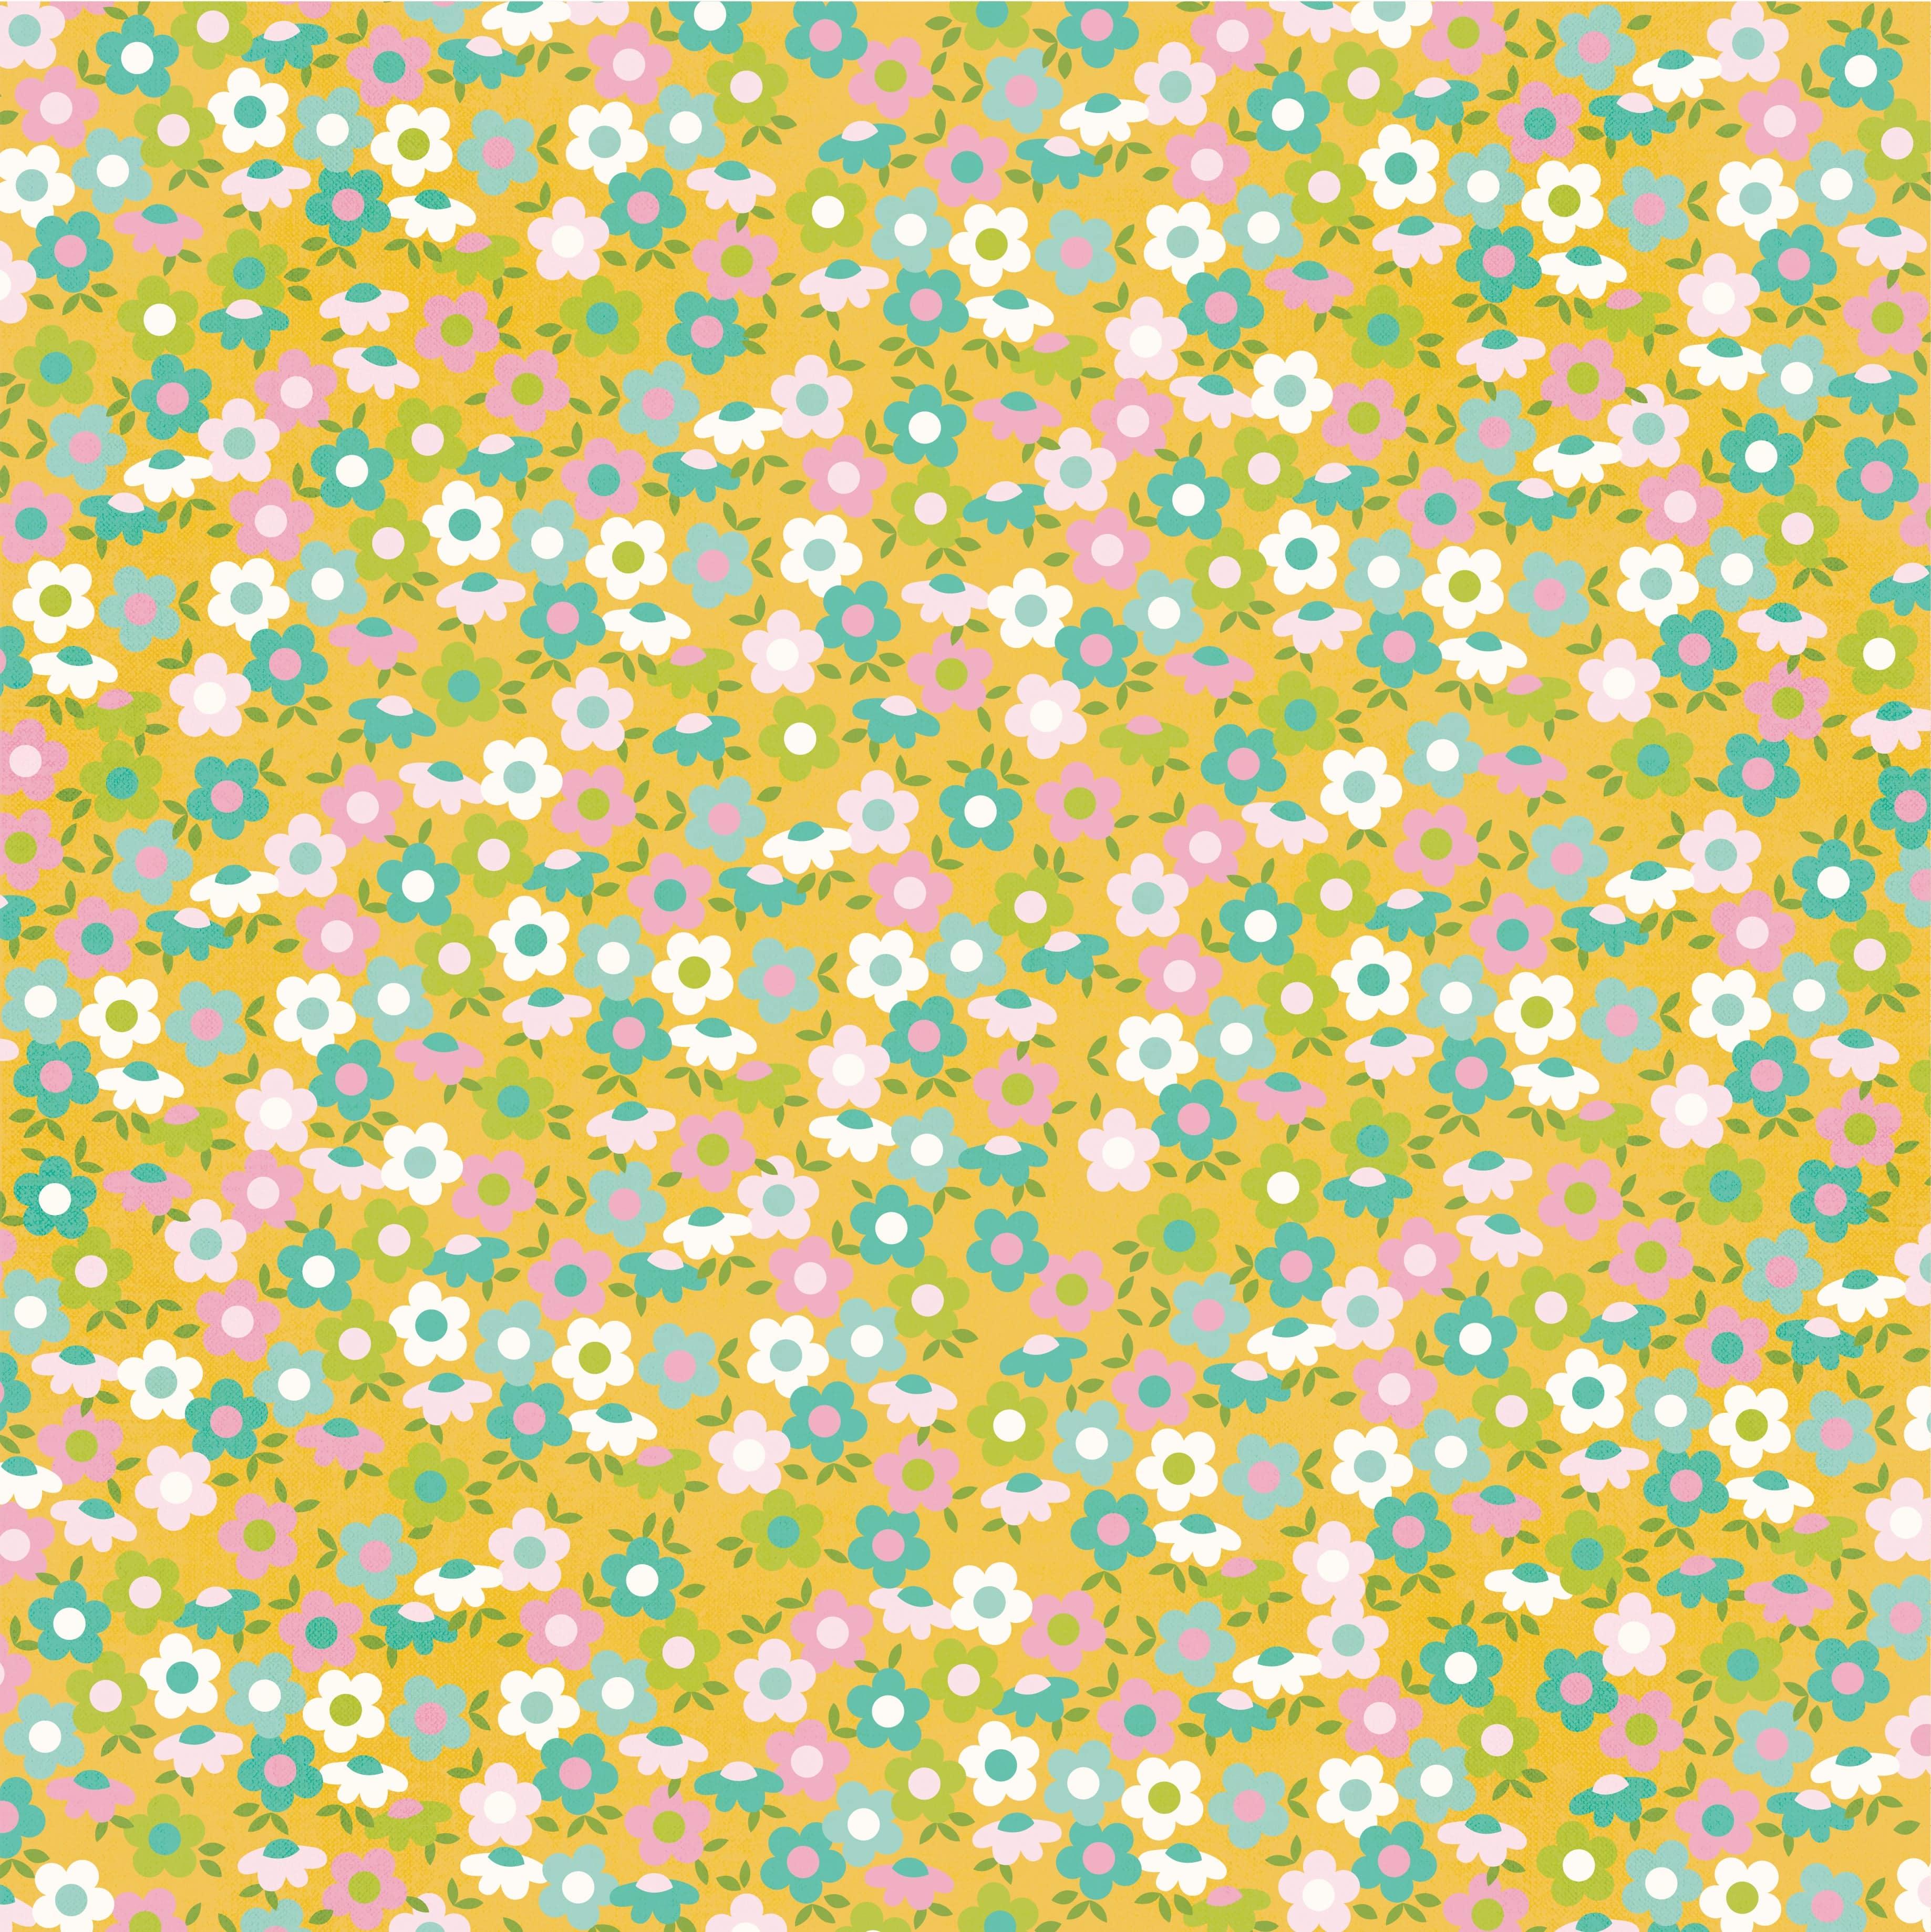 Say Cheese Fantasy At The Park Collection Elements 1 12 x 12 Double-Sided Scrapbook Paper by Simple Stories - Scrapbook Supply Companies